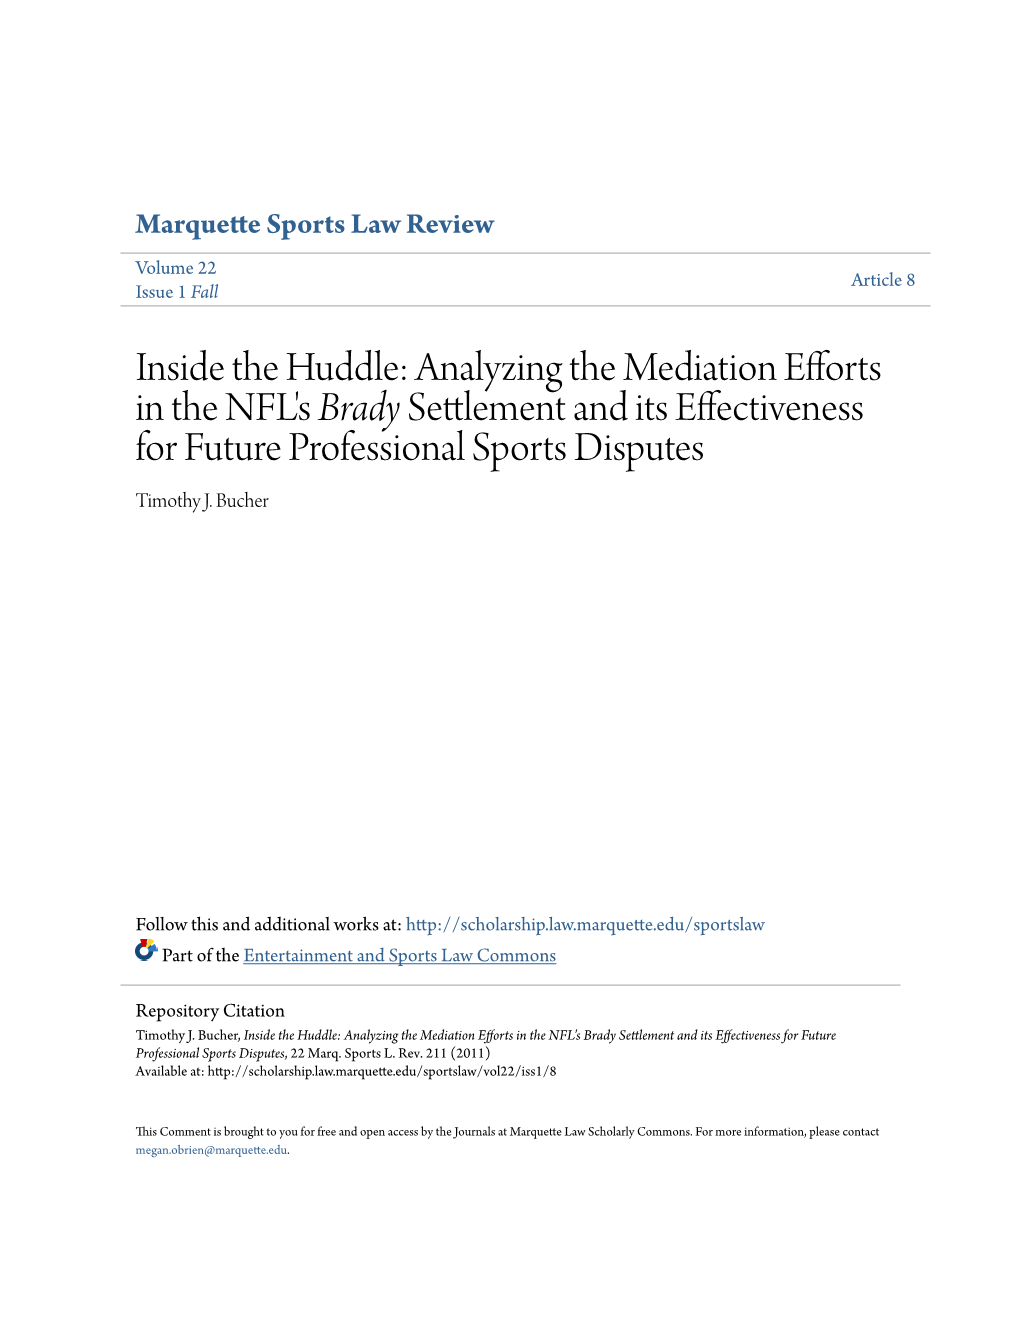 Analyzing the Mediation Efforts in the NFL's Brady Settlement and Its Effectiveness for Future Professional Sports Disputes Timothy J